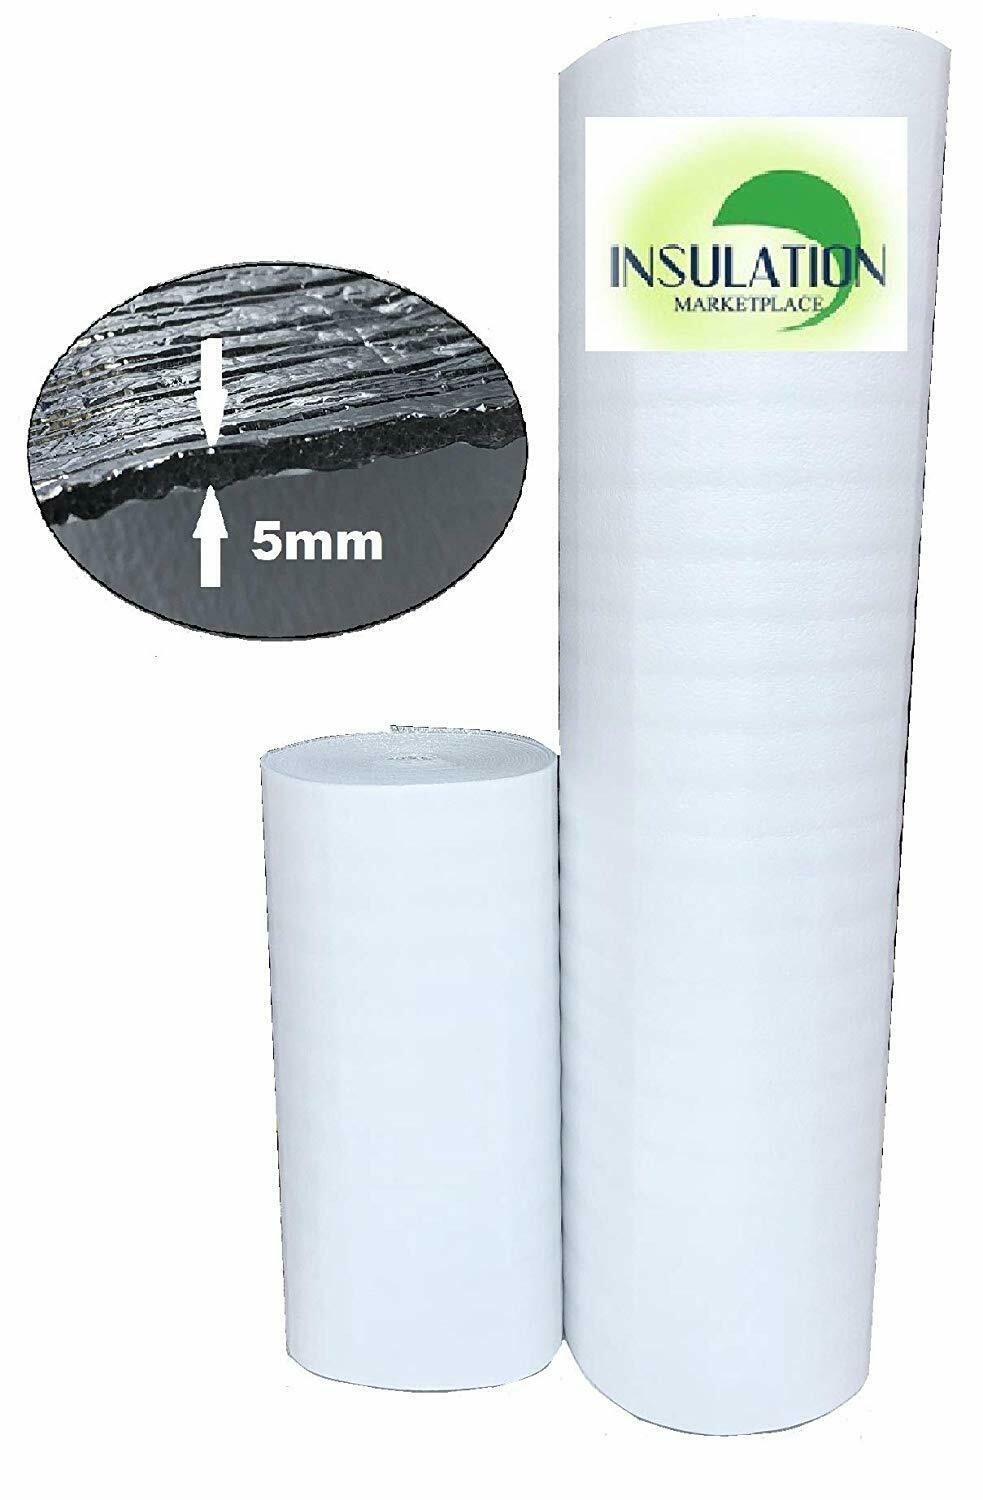 Details about   Reflective White Foam Core Radiant Barrier Thermal Insulation Roll 2x250 500 SF 